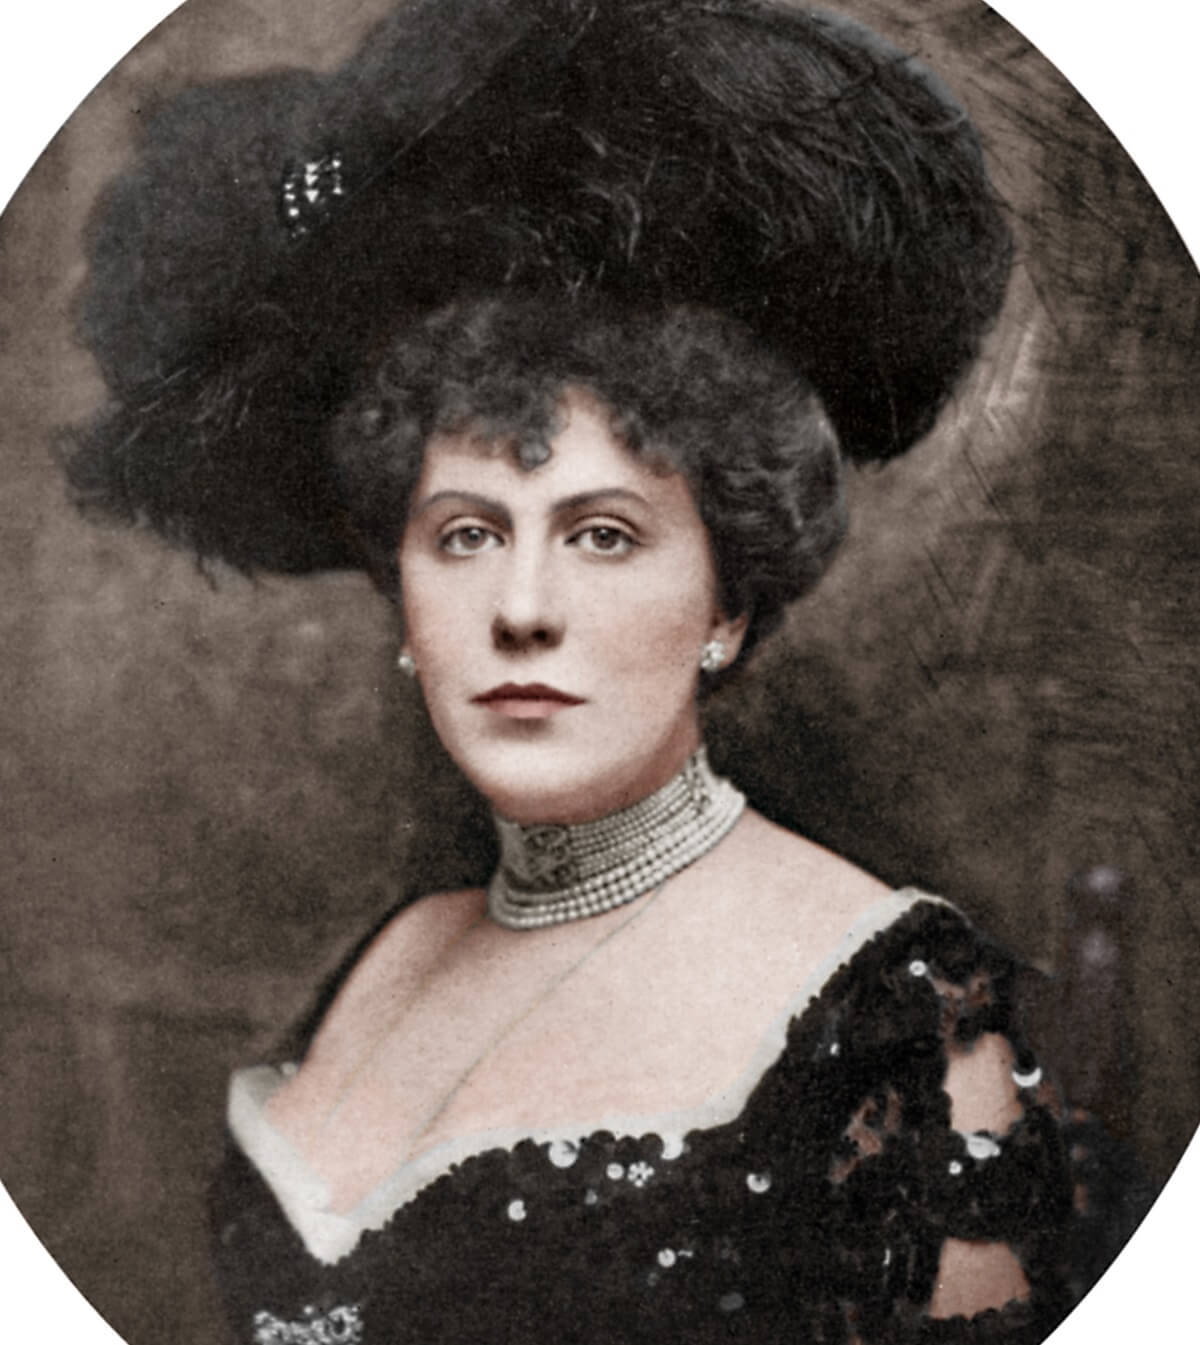 Photo of Alice Keppel, who was one of the most famous mistresses of King Edward VII